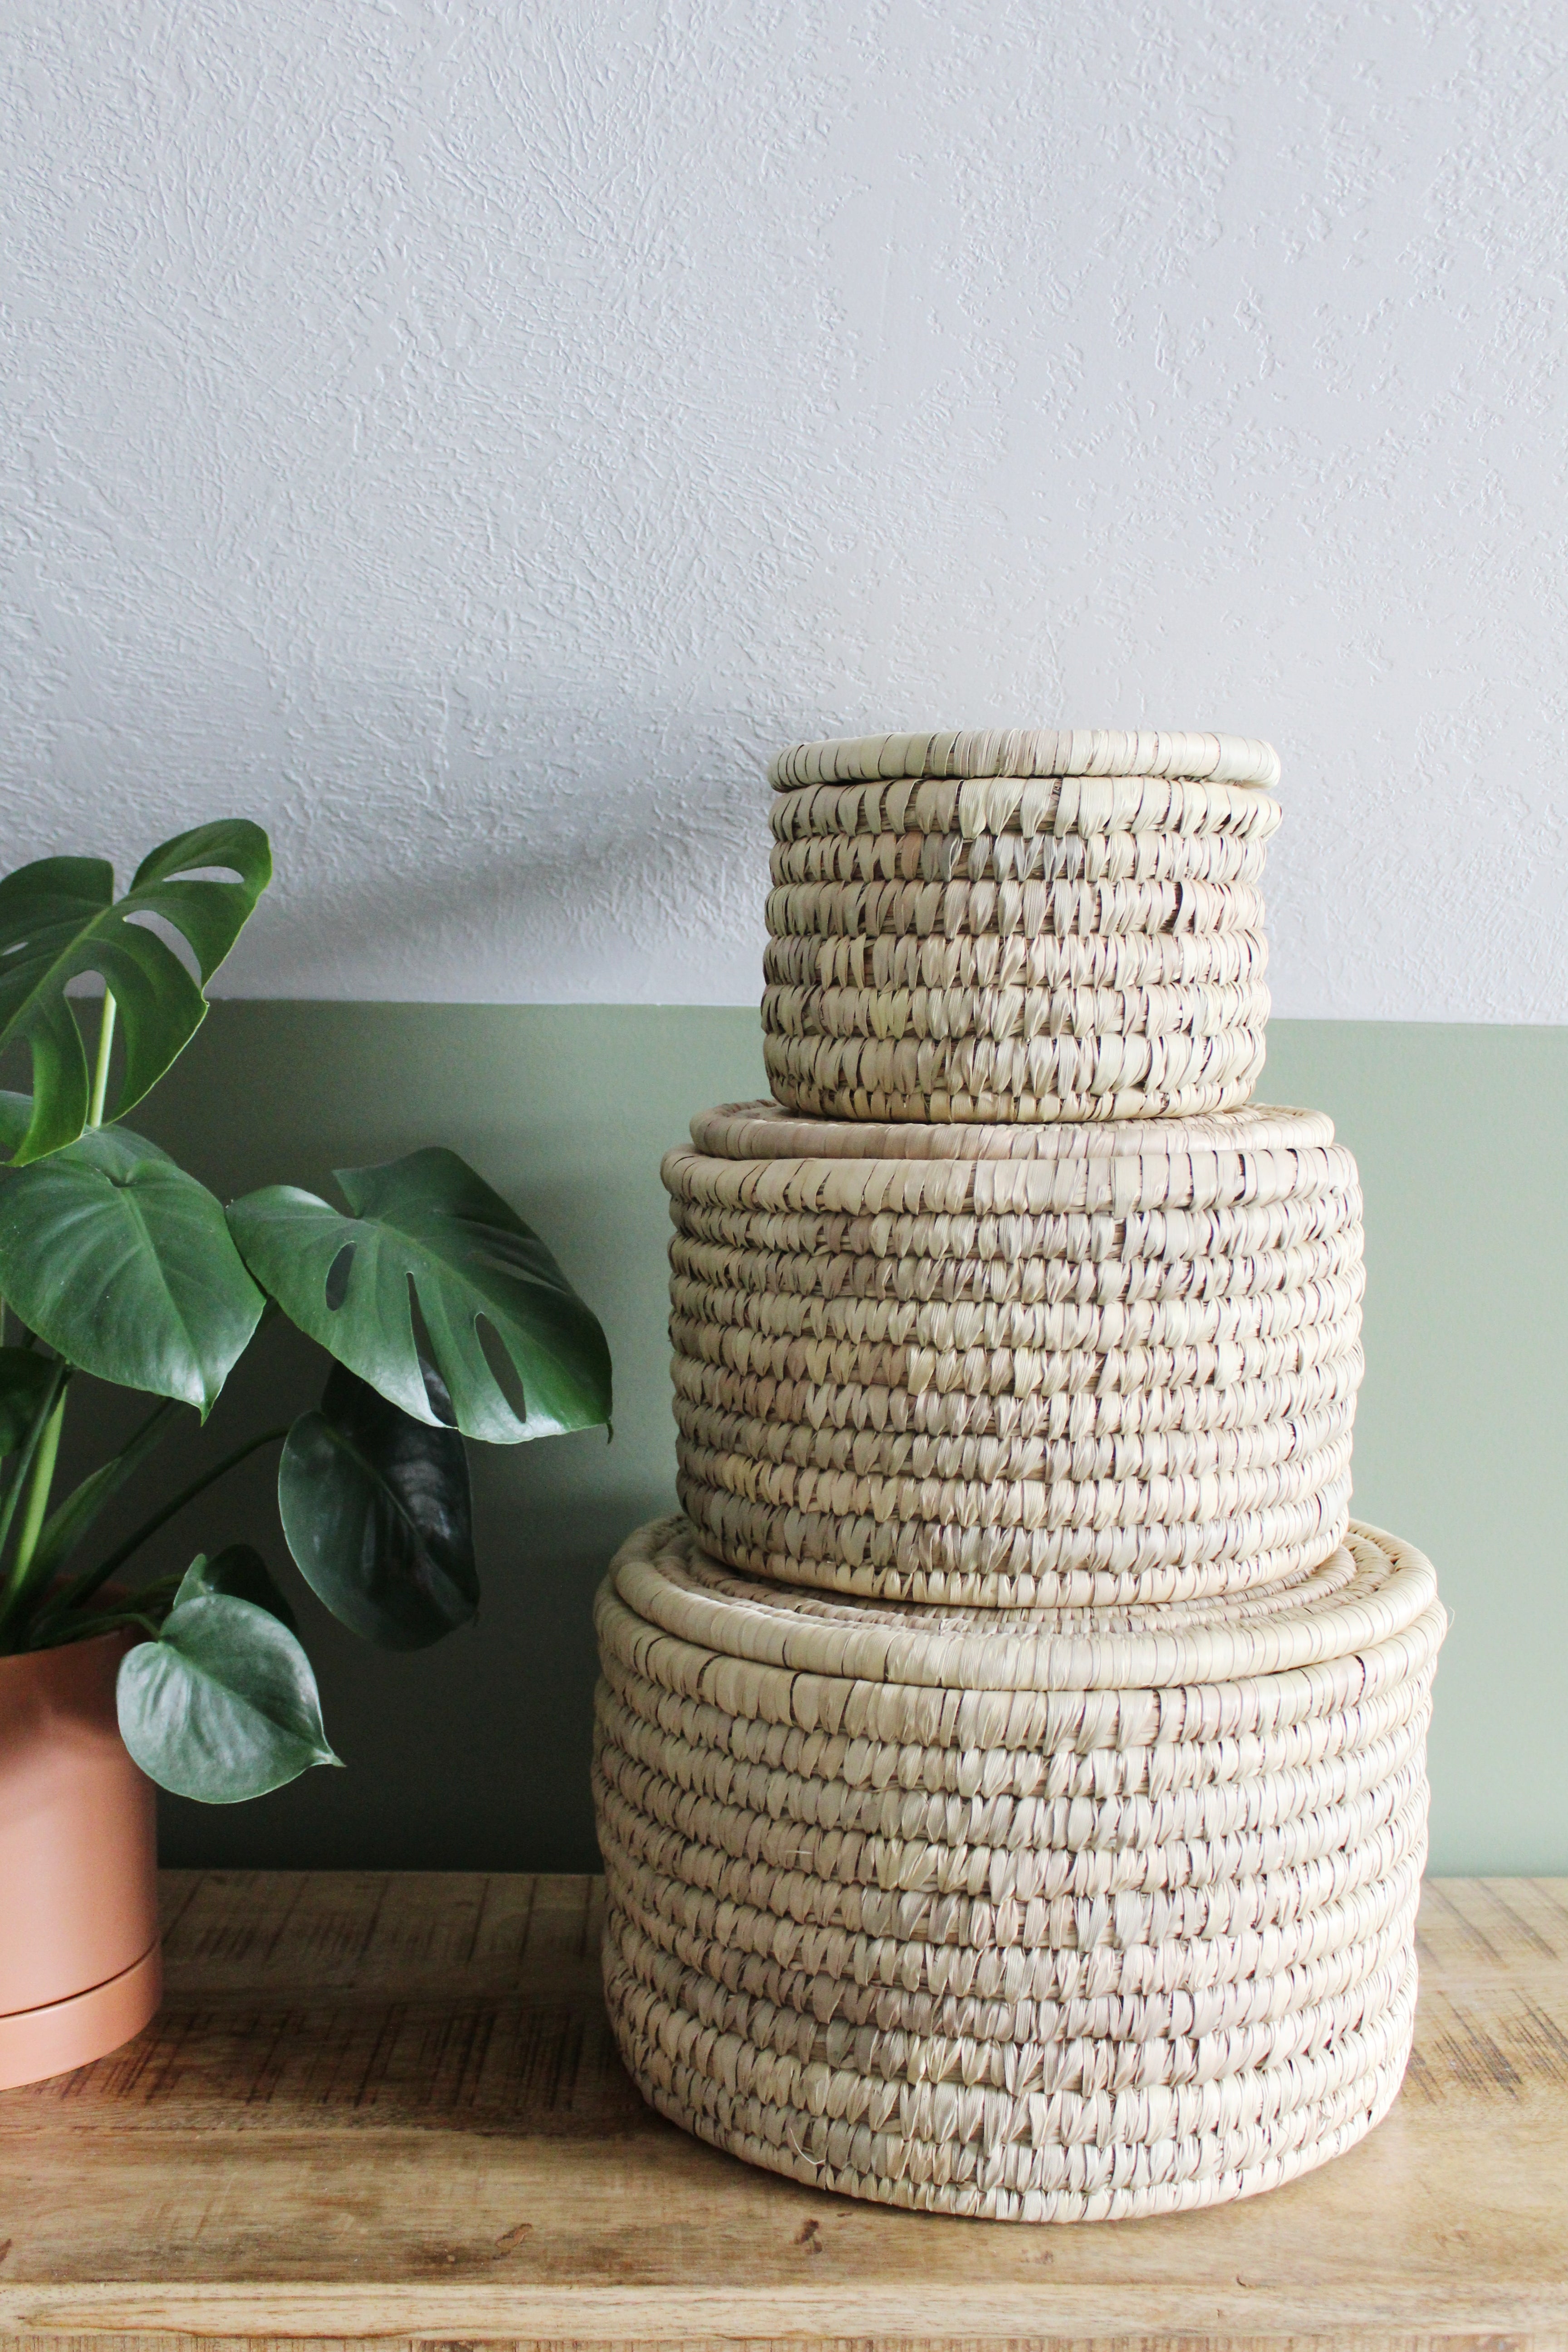 Hand Woven Baskets with Lids